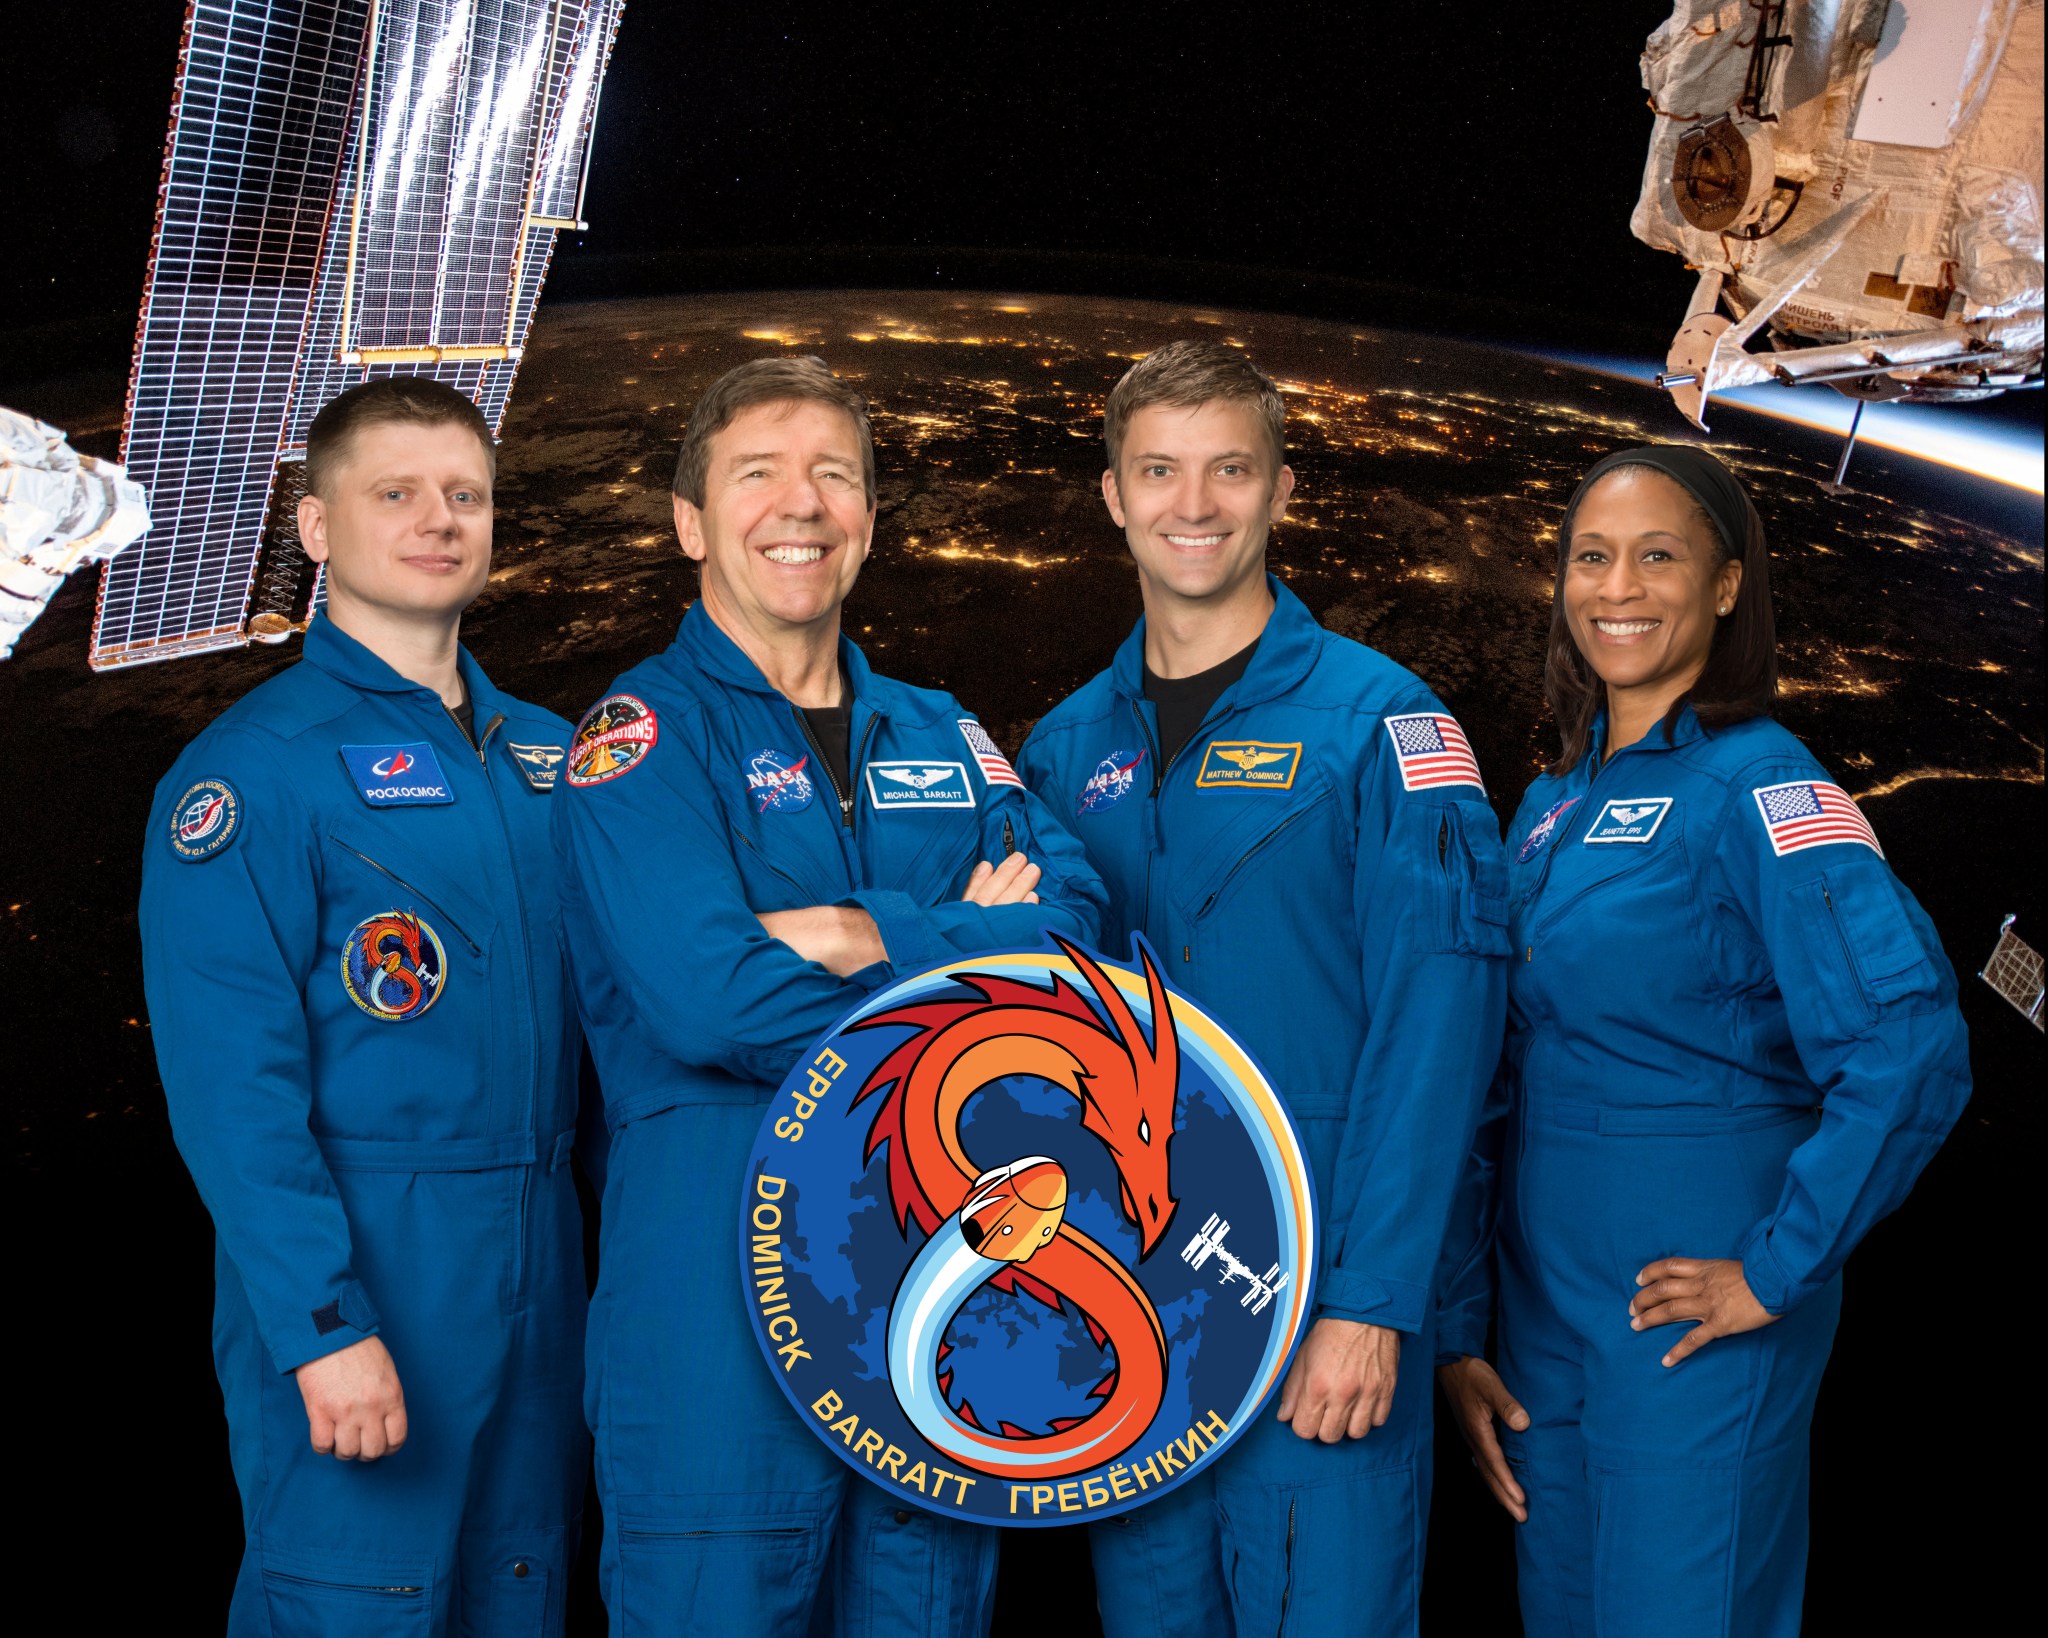 The official crew portrait for NASA's SpaceX Crew-8 crew members.